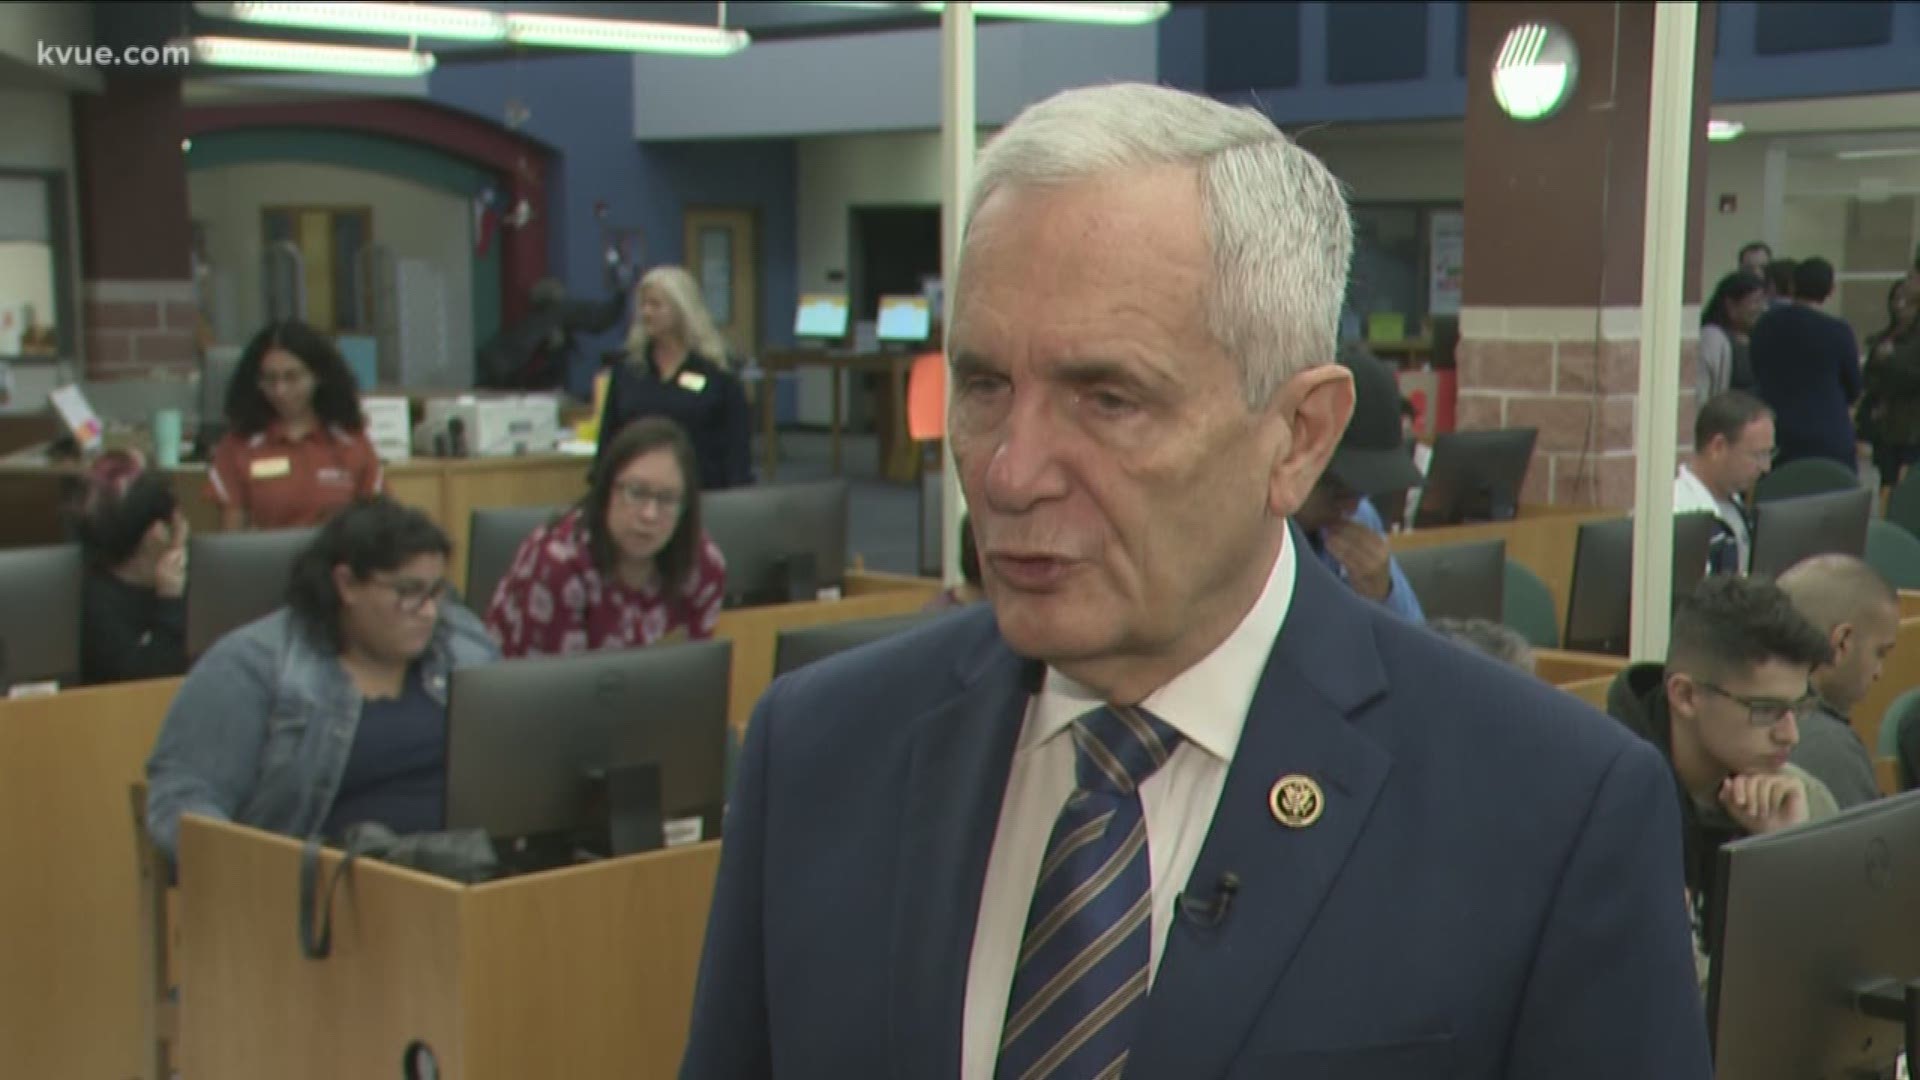 More than $2 billion in financial aid was left on the table because a certain application is too long and hard to fill out, according to Rep. Lloyd Doggett.